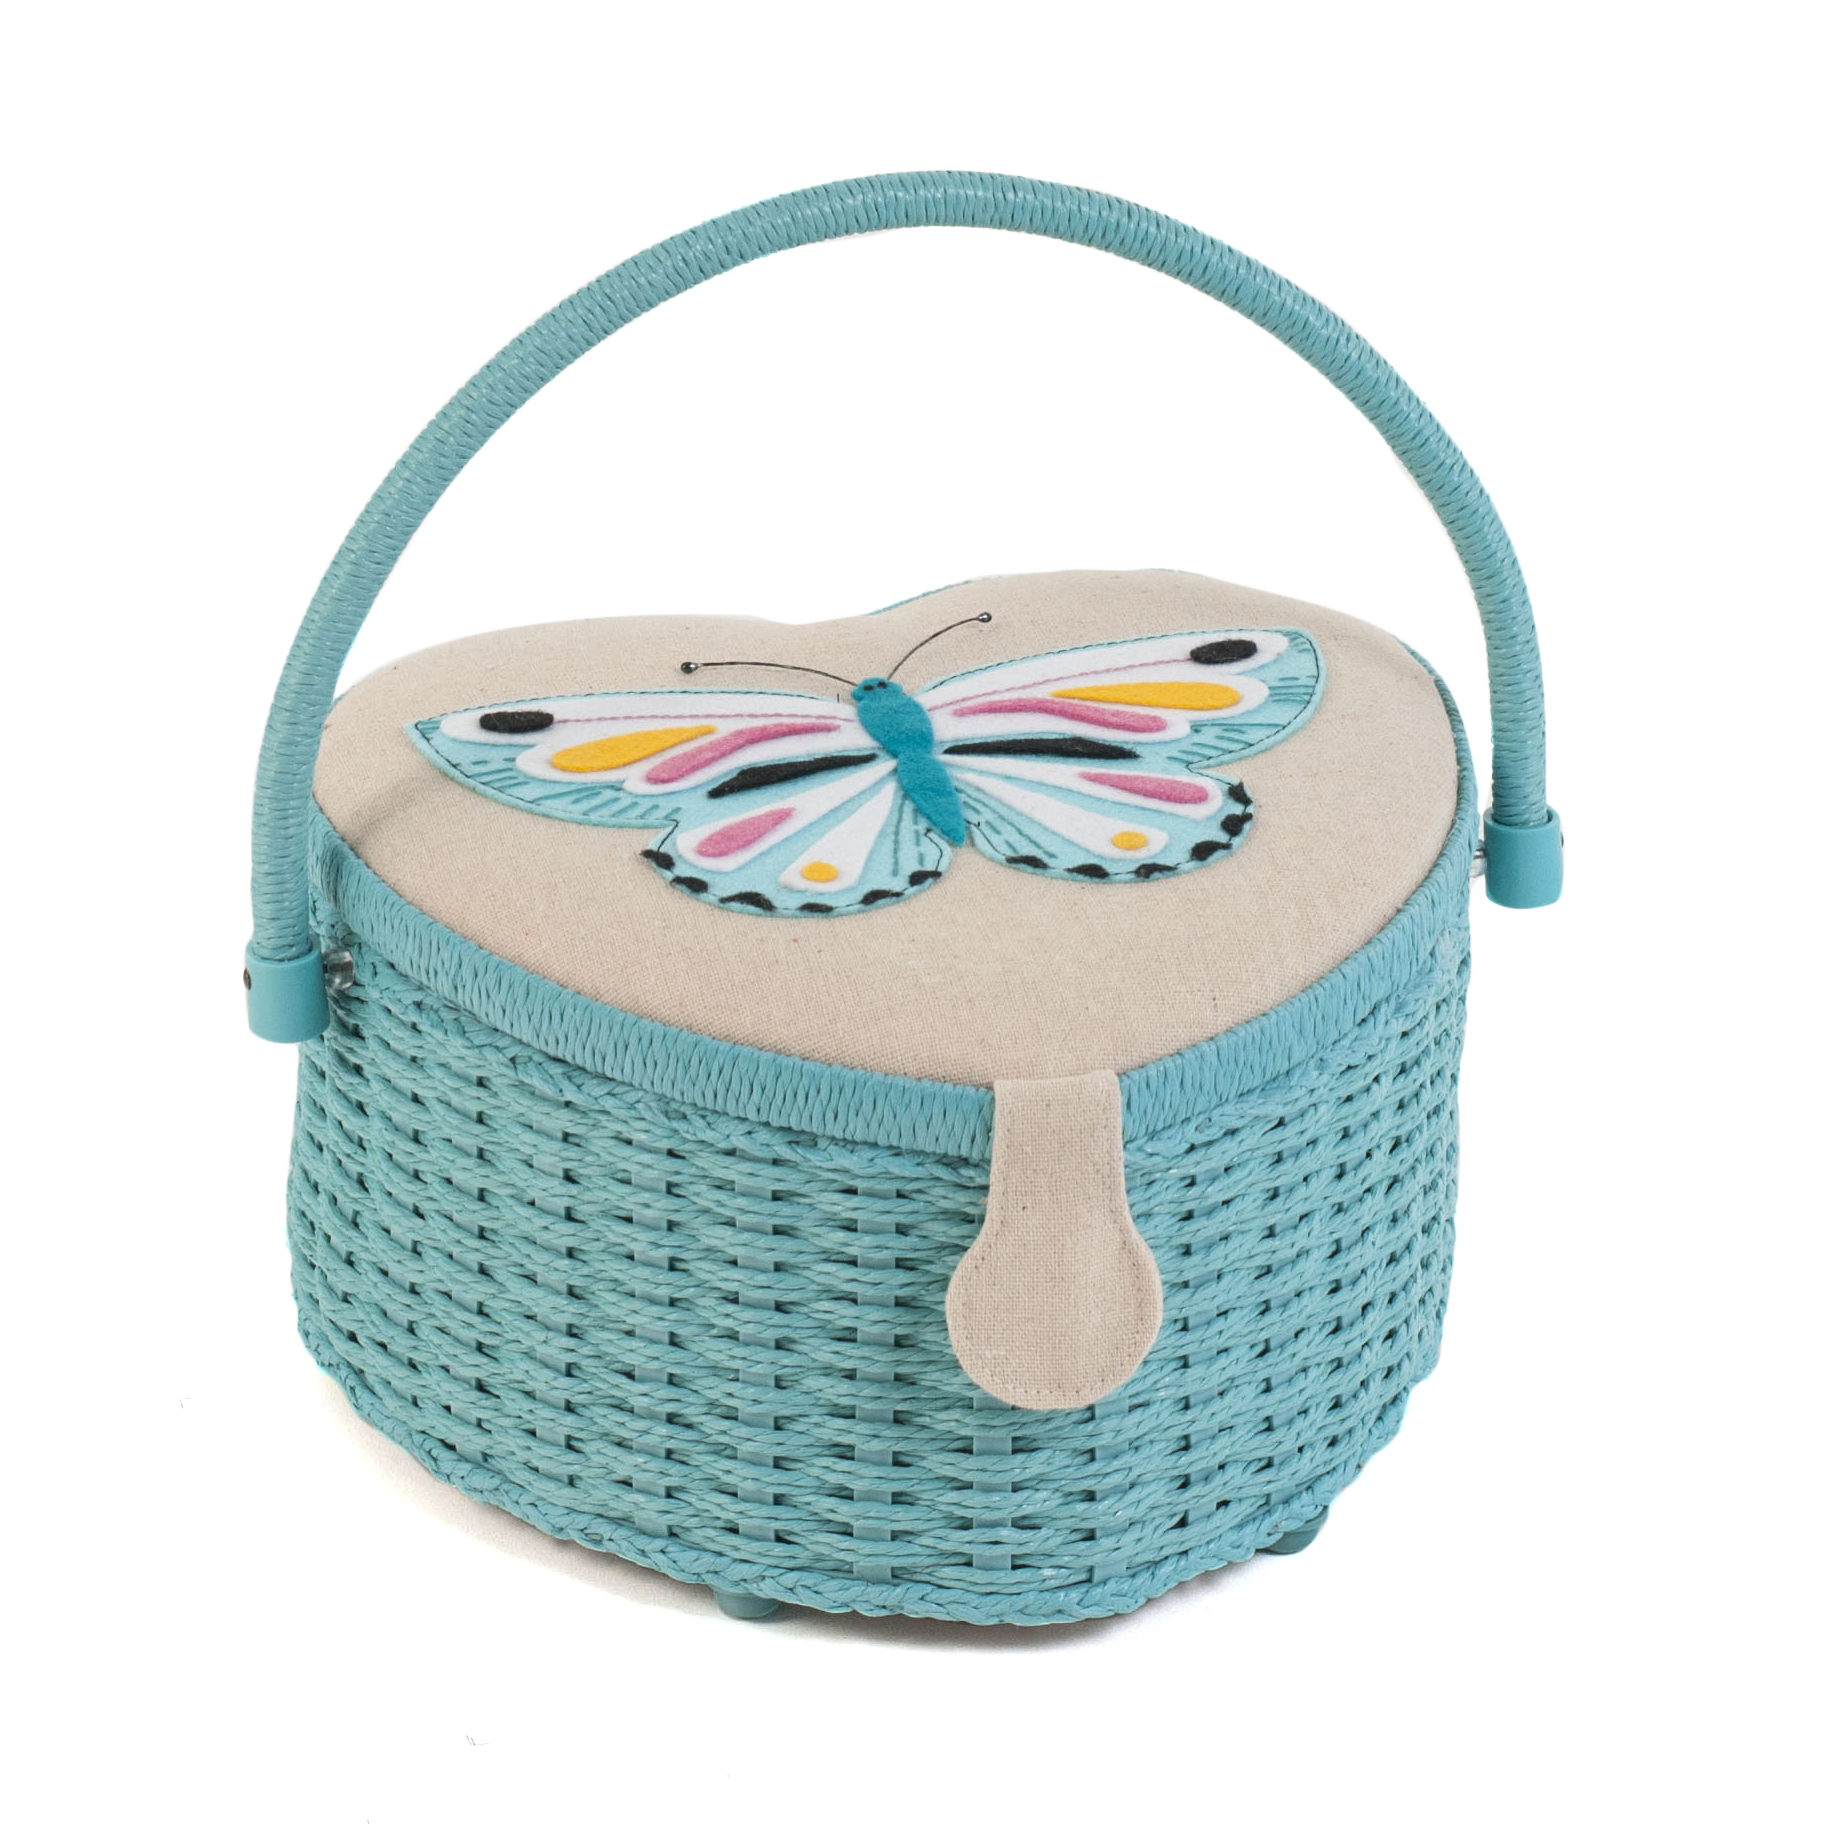 Sewing Boxes & Baskets Archives - The Nimble Thimble